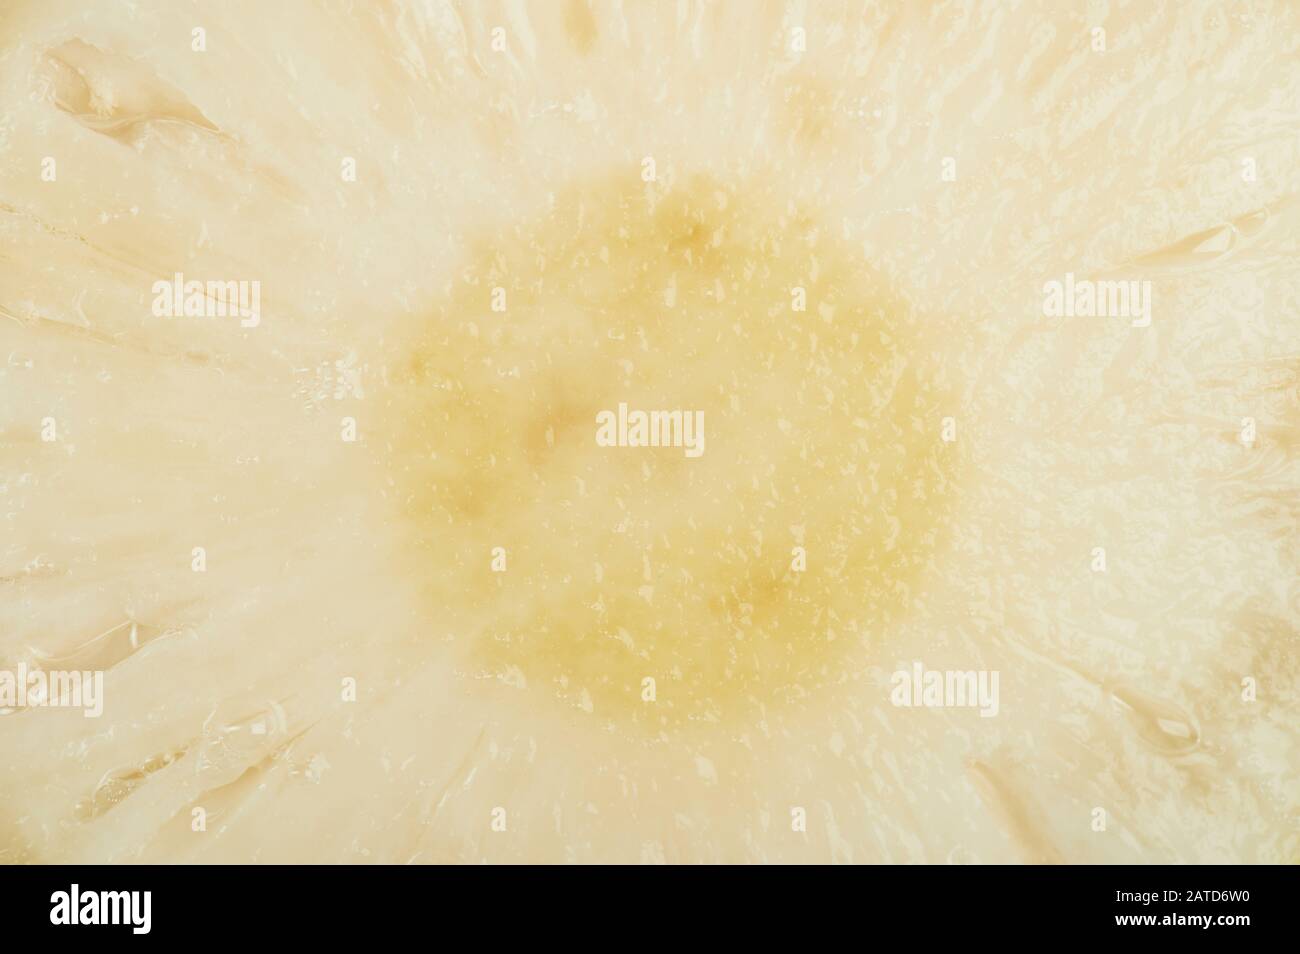 Texture of sweet fresh pineapple close up view Stock Photo